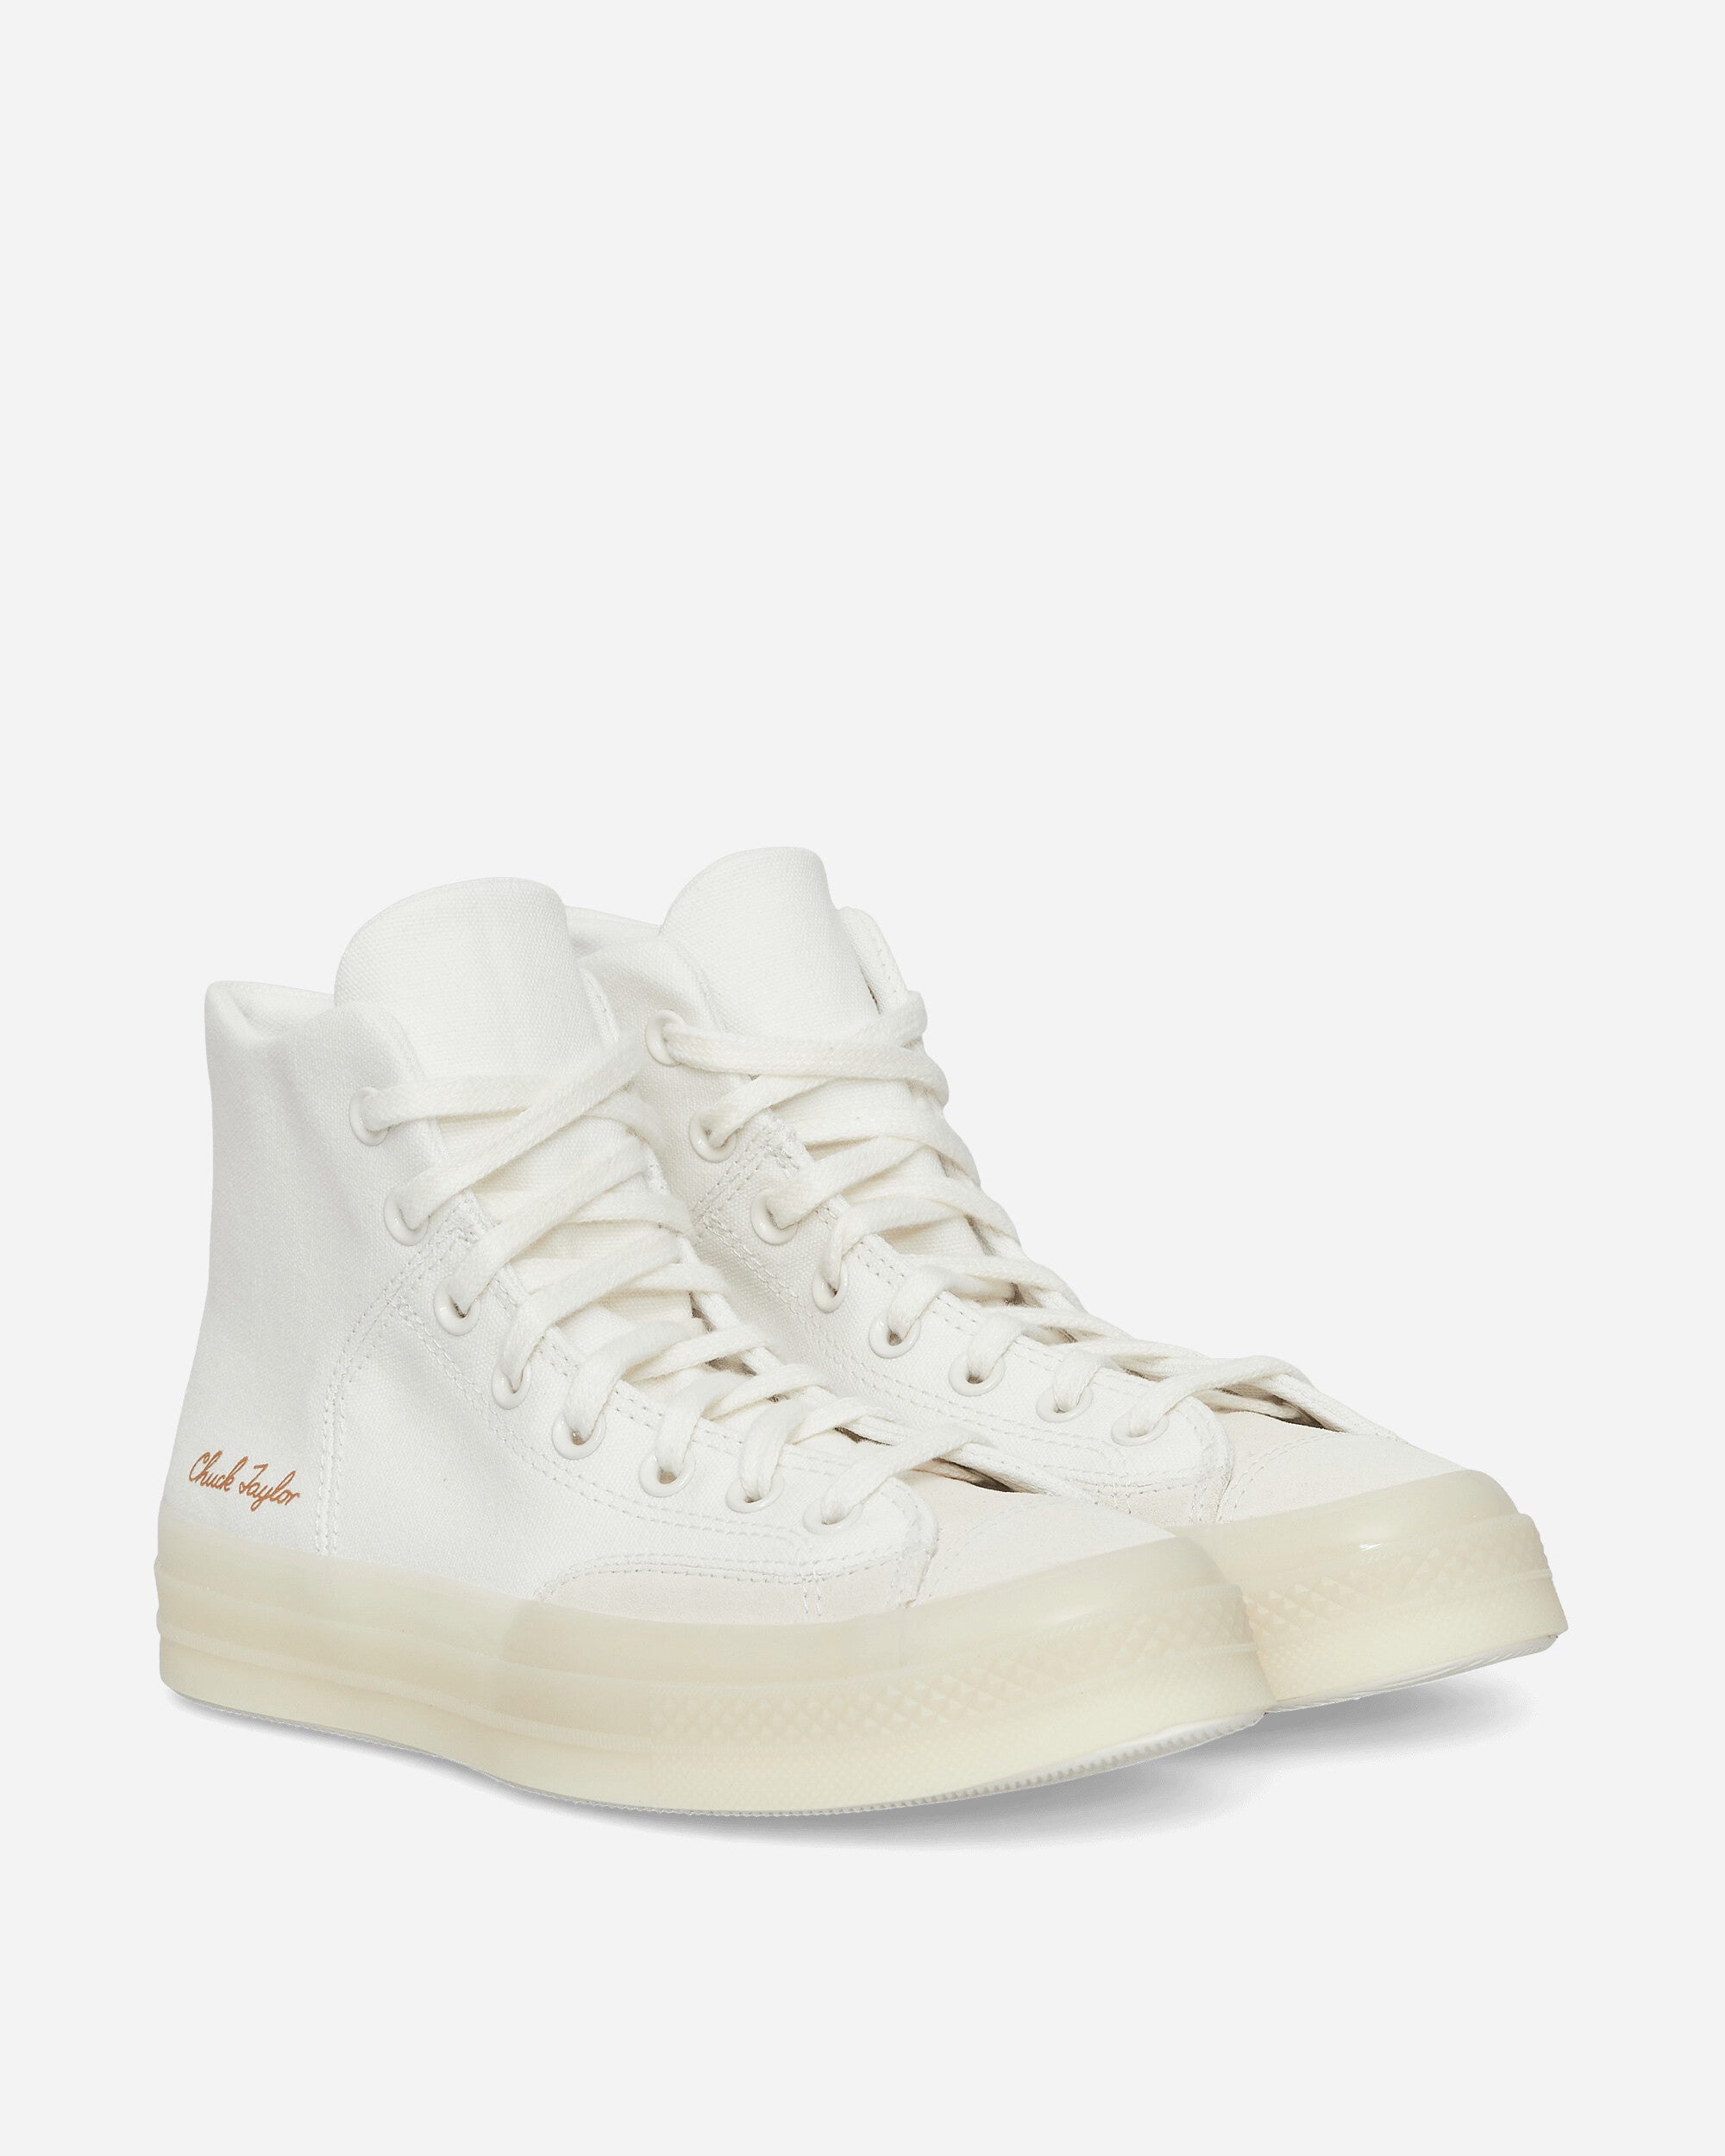 Converse Chuck 70 Marquis Vintage White/Natural Ivory Sneakers High A03426C